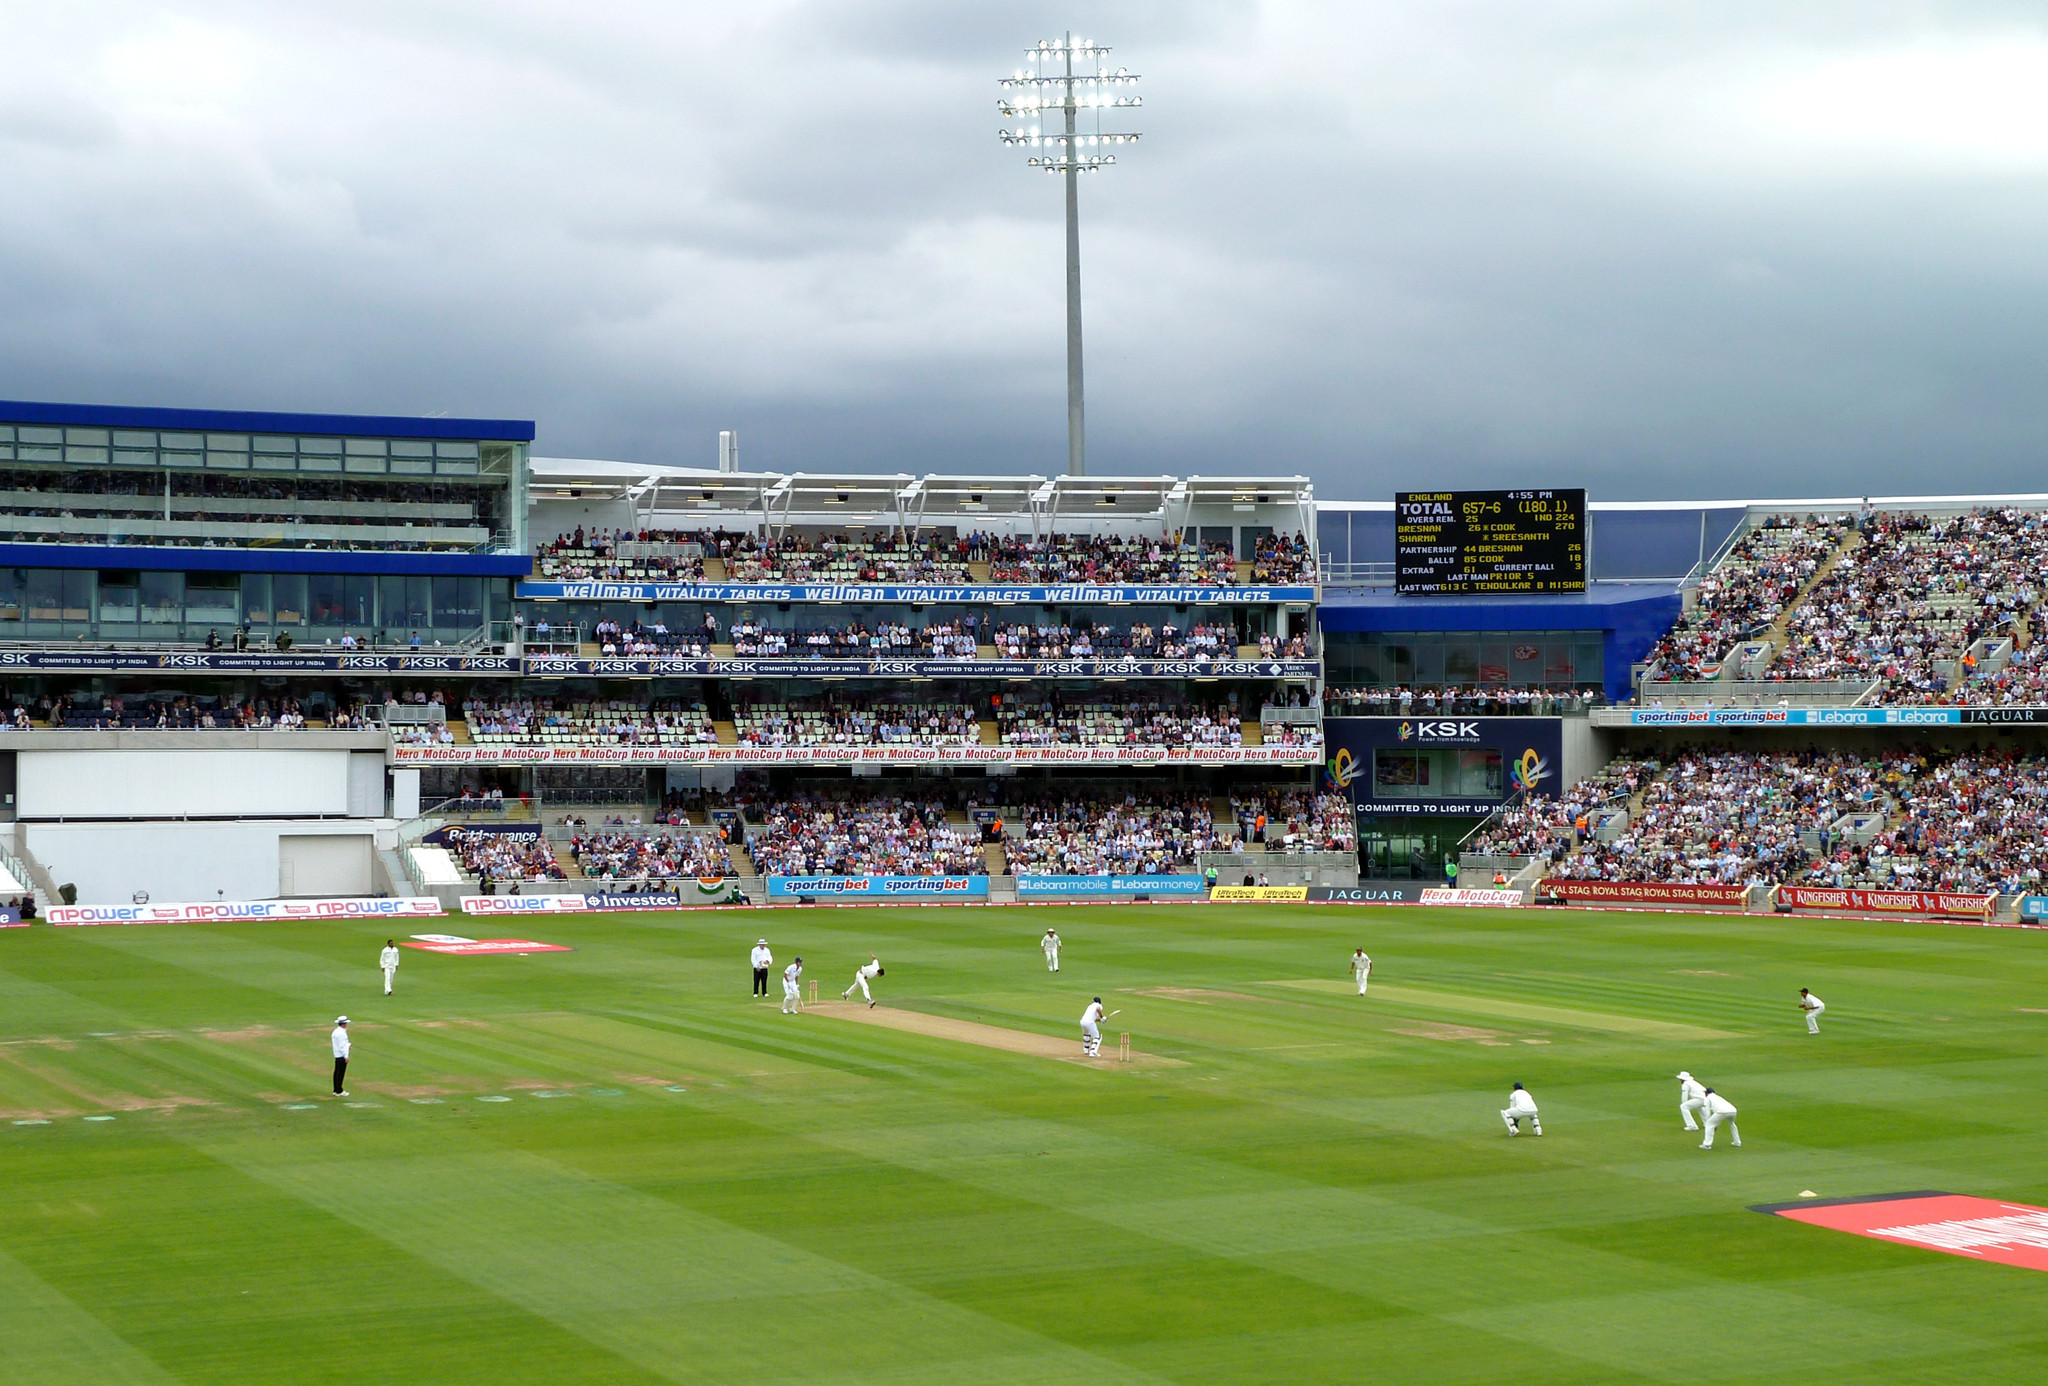 Edgbaston Stadium is to host all the matches during the women's cricket tournament at Birmingham 2022 ©Wikipedia